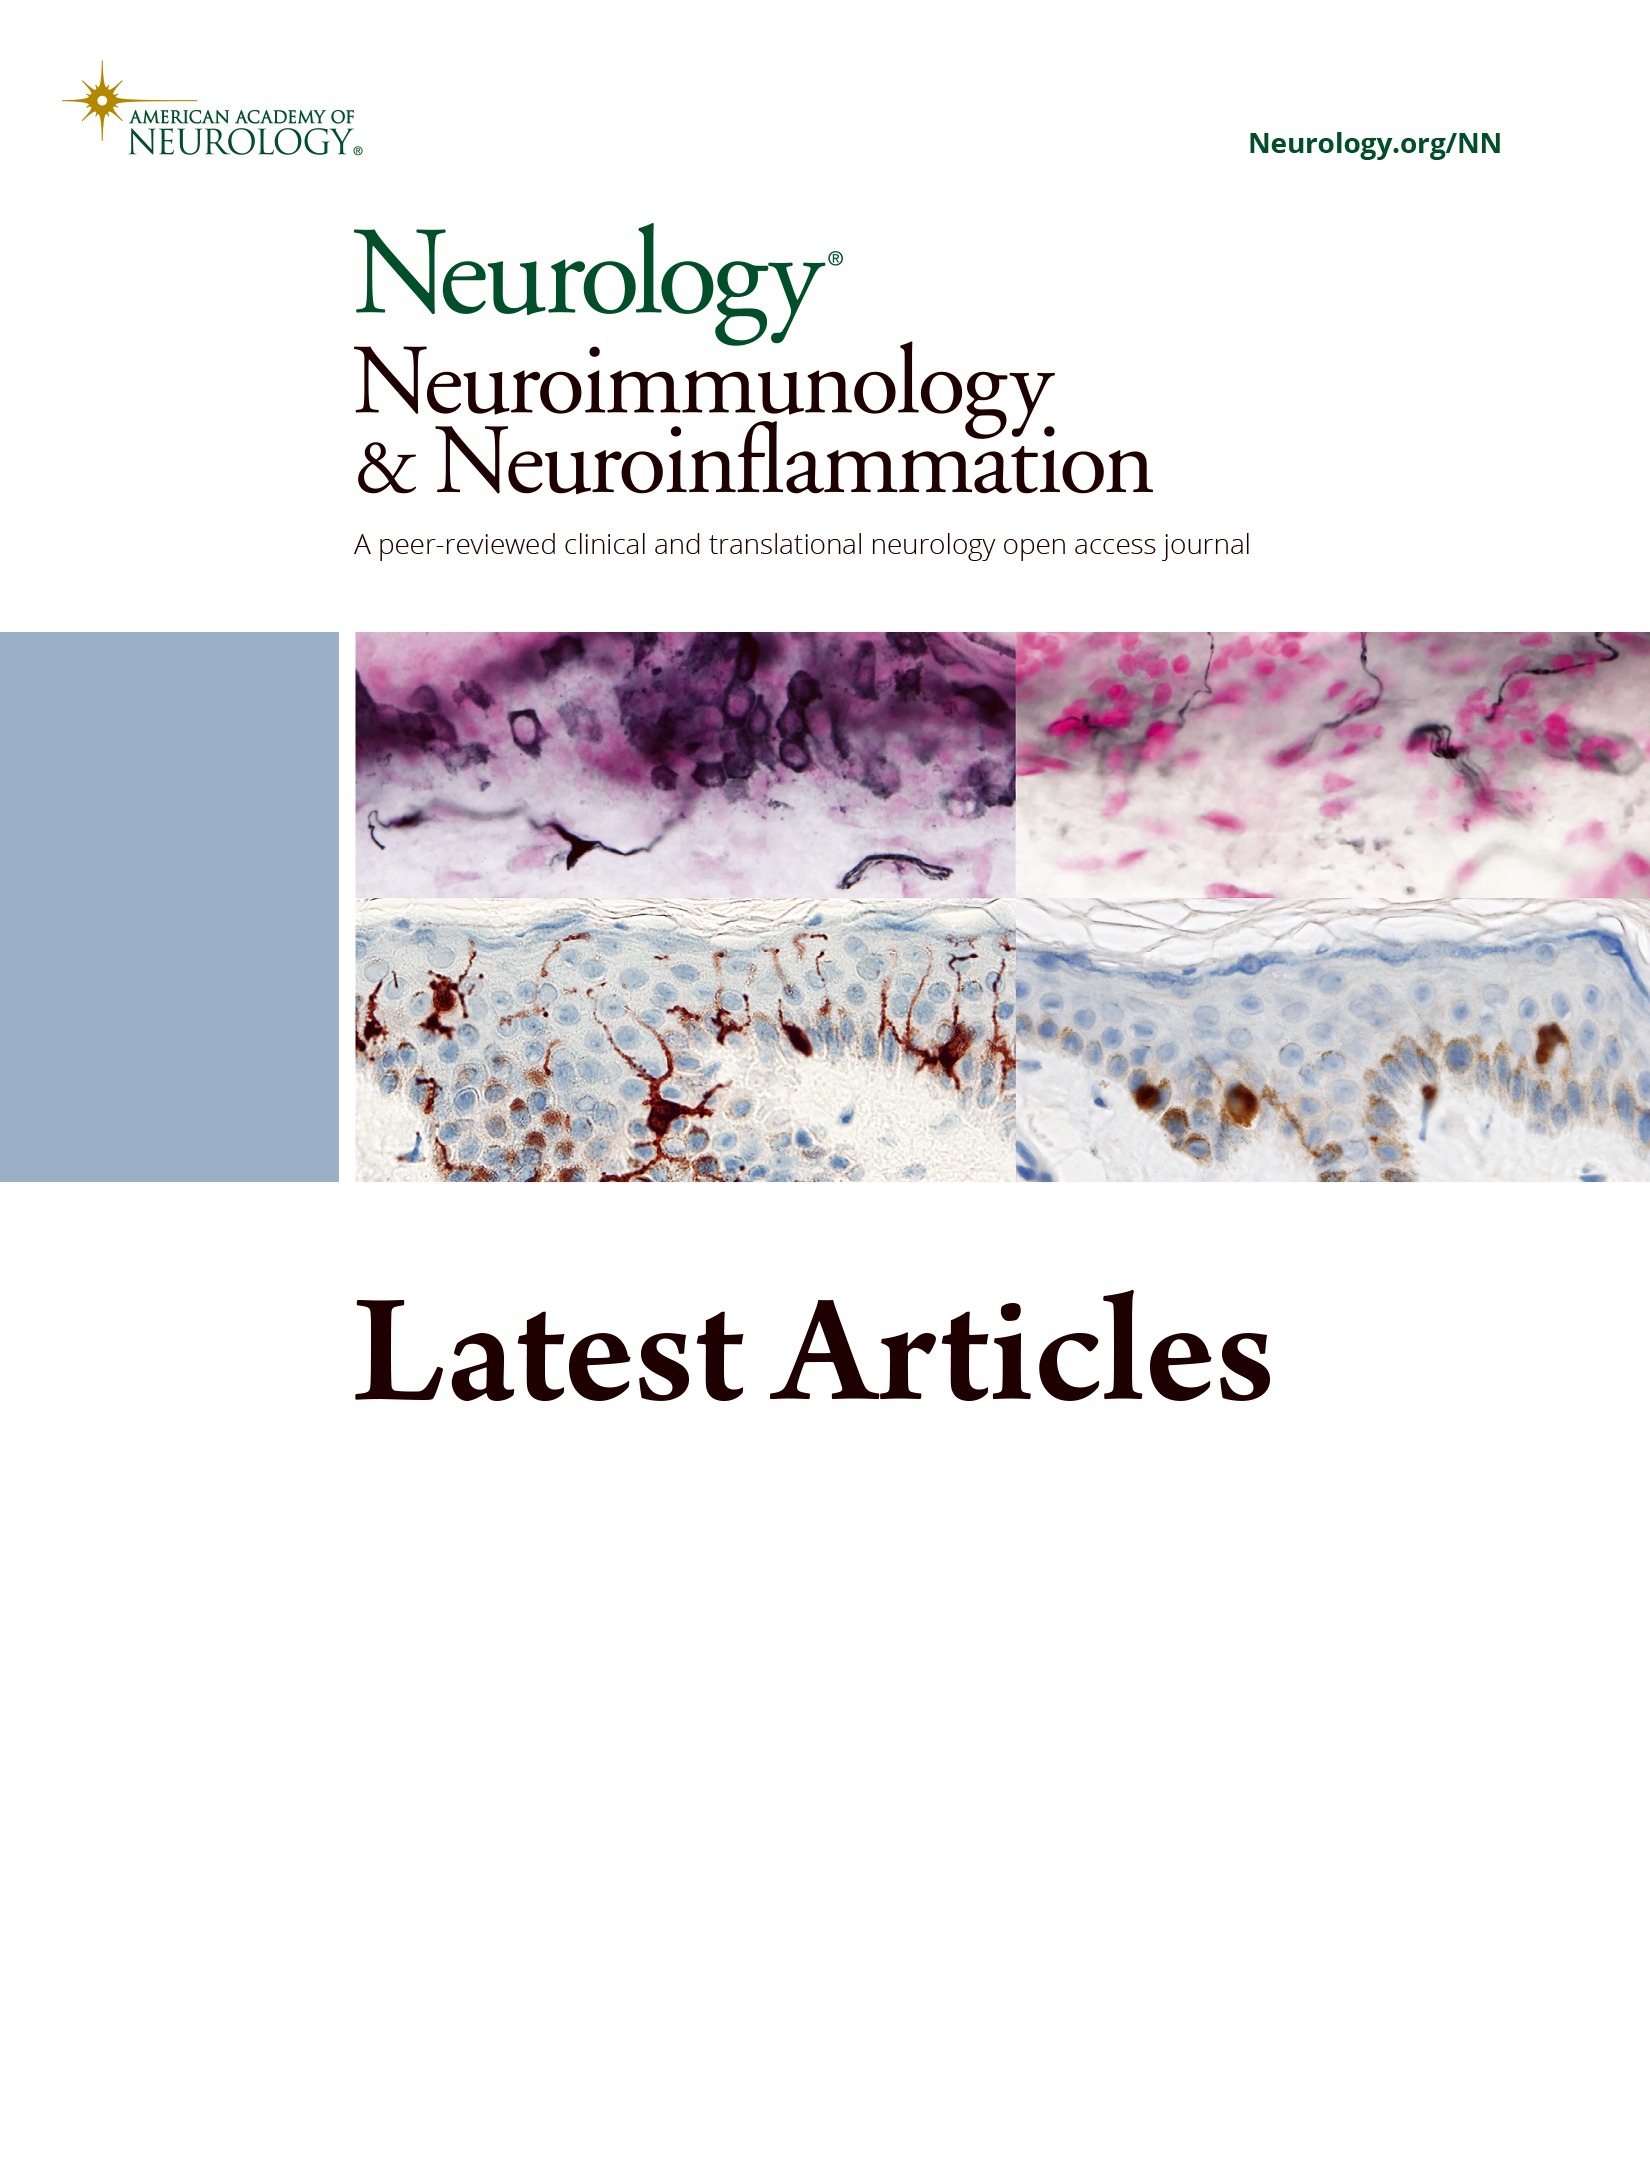 Cerebellar Ataxia With Anti-DNER Antibodies: Outcomes and Immunologic Features